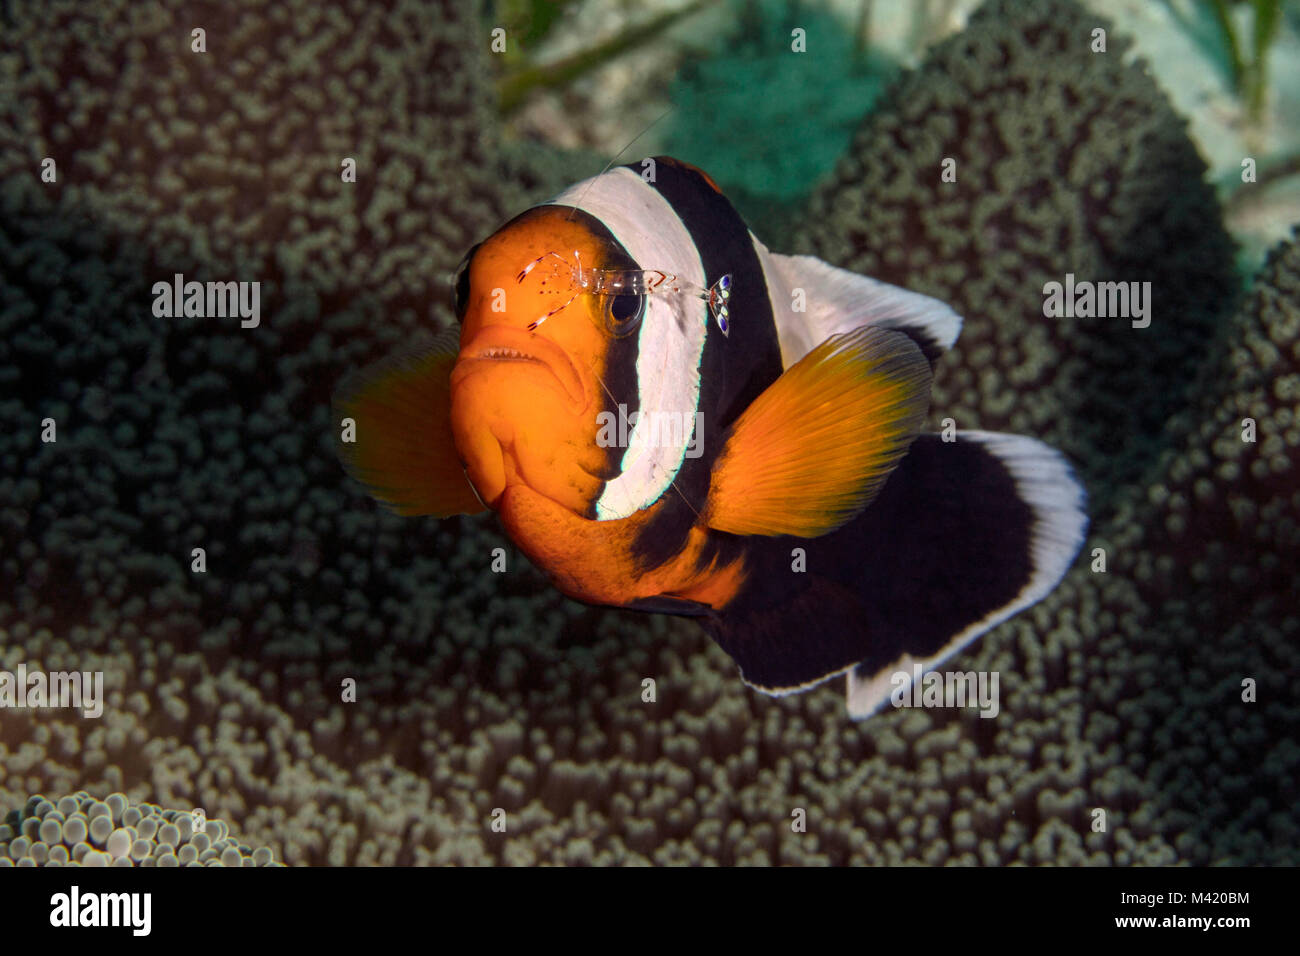 Little buddy. Anemonefish and shrimp (Ancylomenes holthuisi cleaning Amphiprion polymnus) near Panglao Island, Philippines. Stock Photo